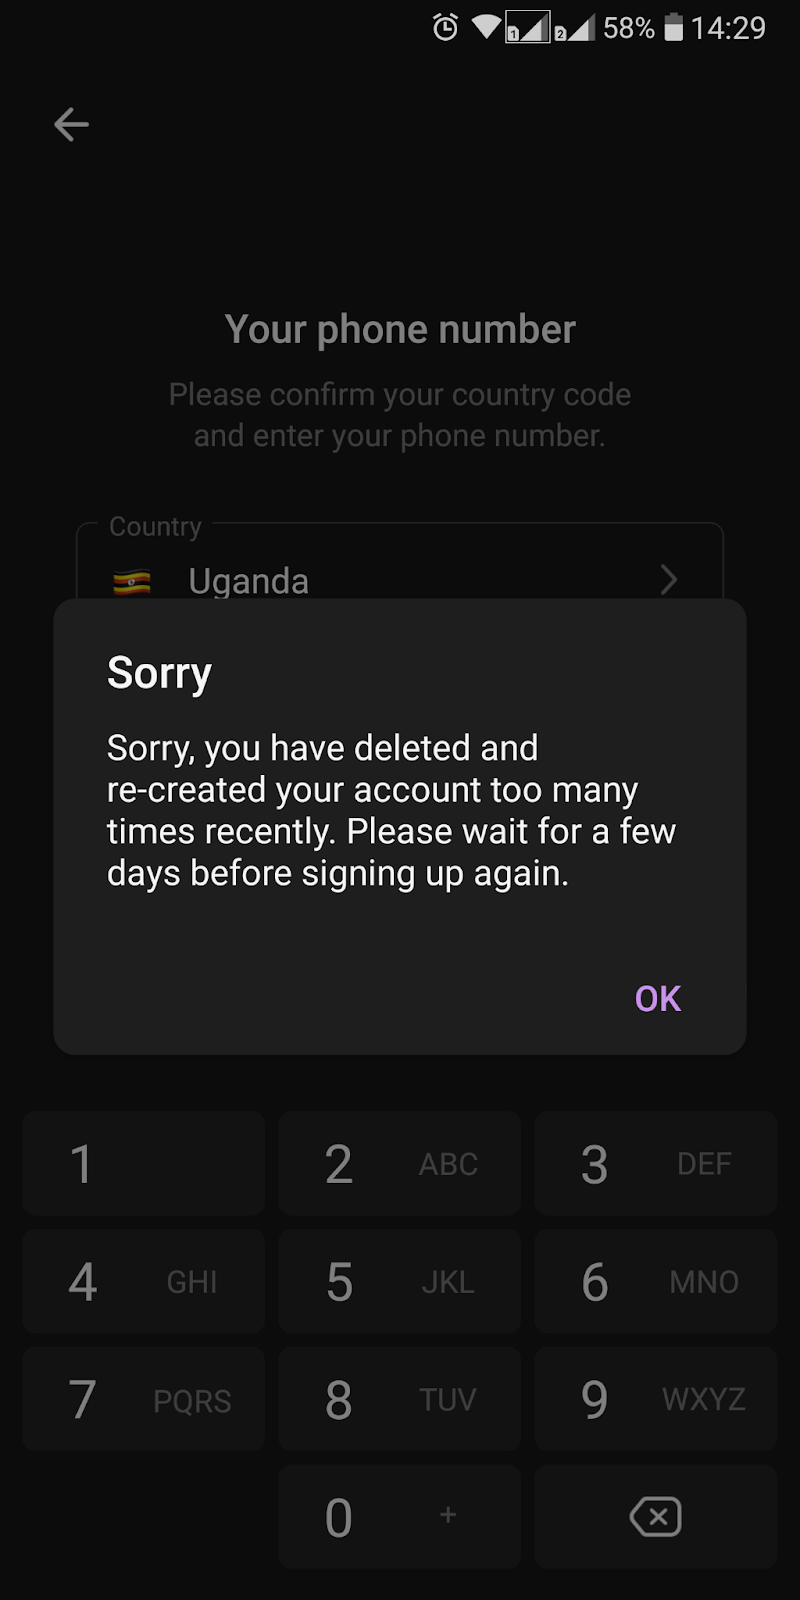 Error prompt for deleted account number